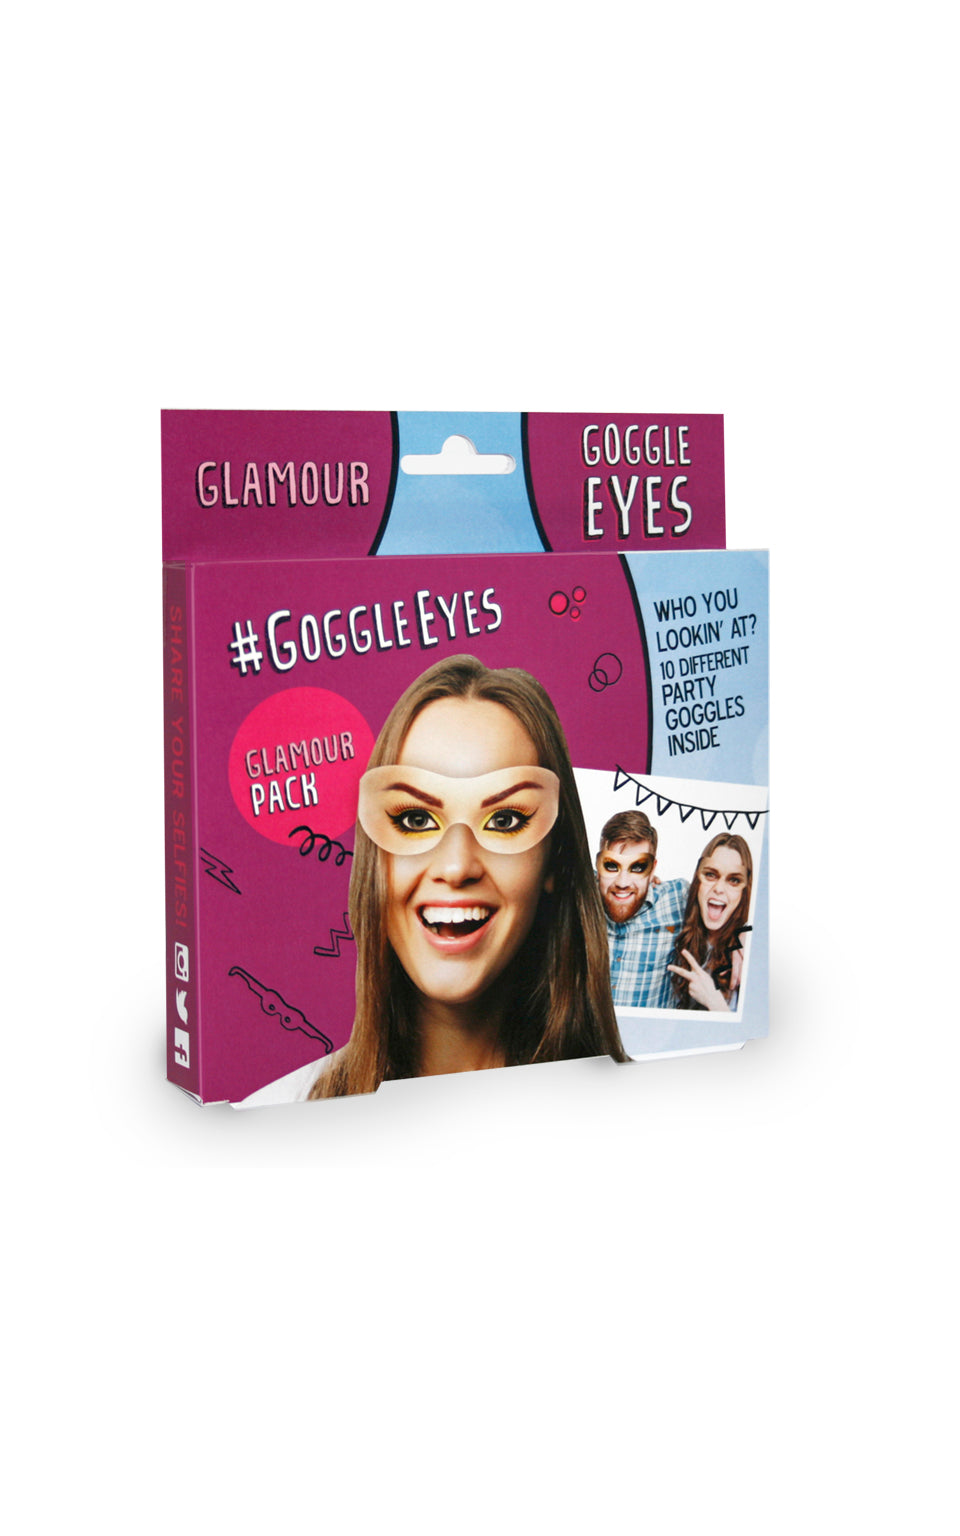 Glamour themed Goggle Eyes. Pack of 10 cardboard glasses with hilarious designs. Perfect for selfies.